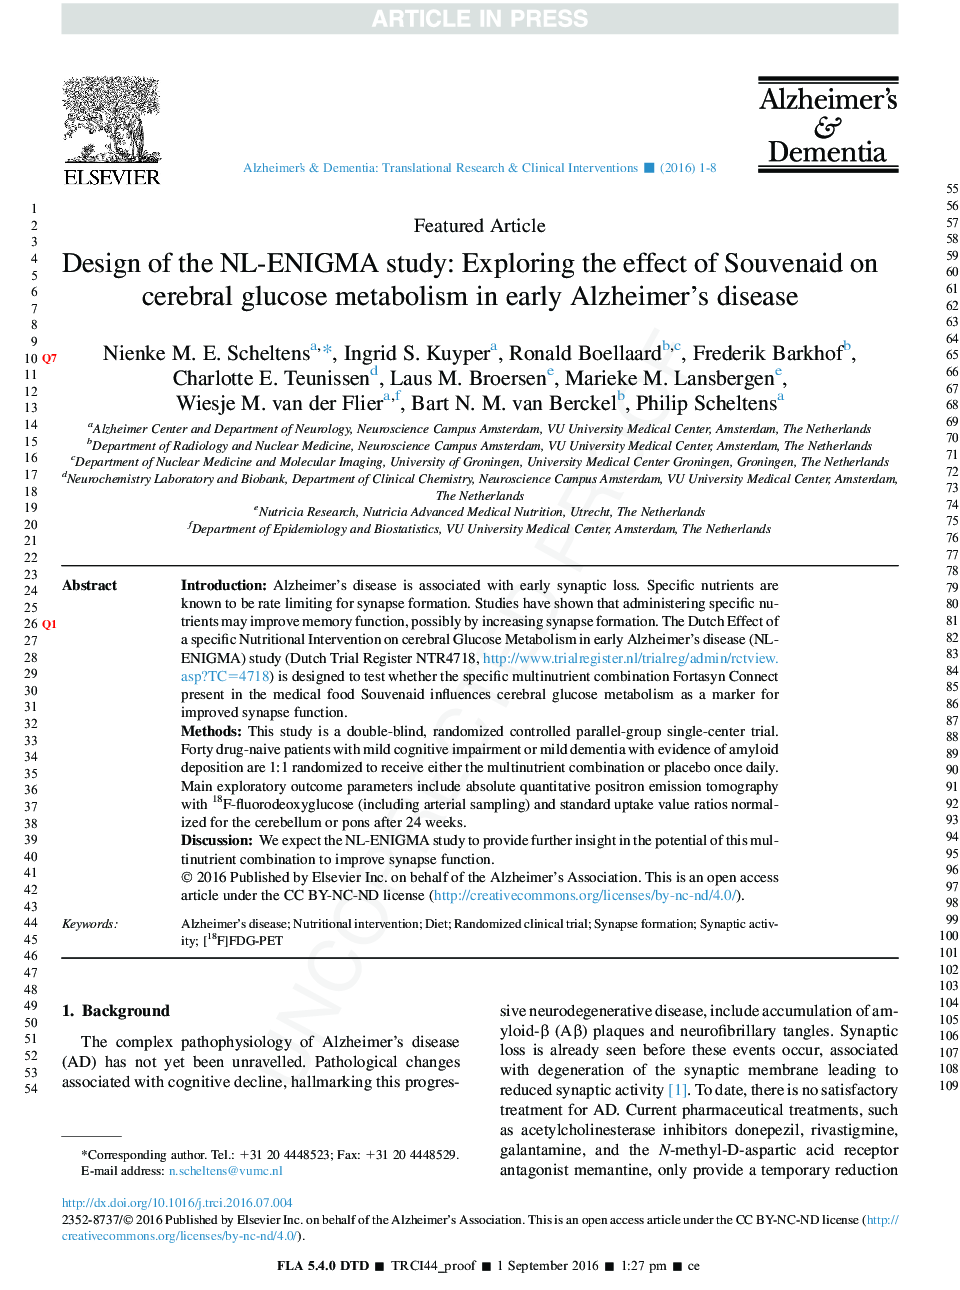 Design of the NL-ENIGMA study: Exploring the effect of Souvenaid on cerebral glucose metabolism in early Alzheimer's disease